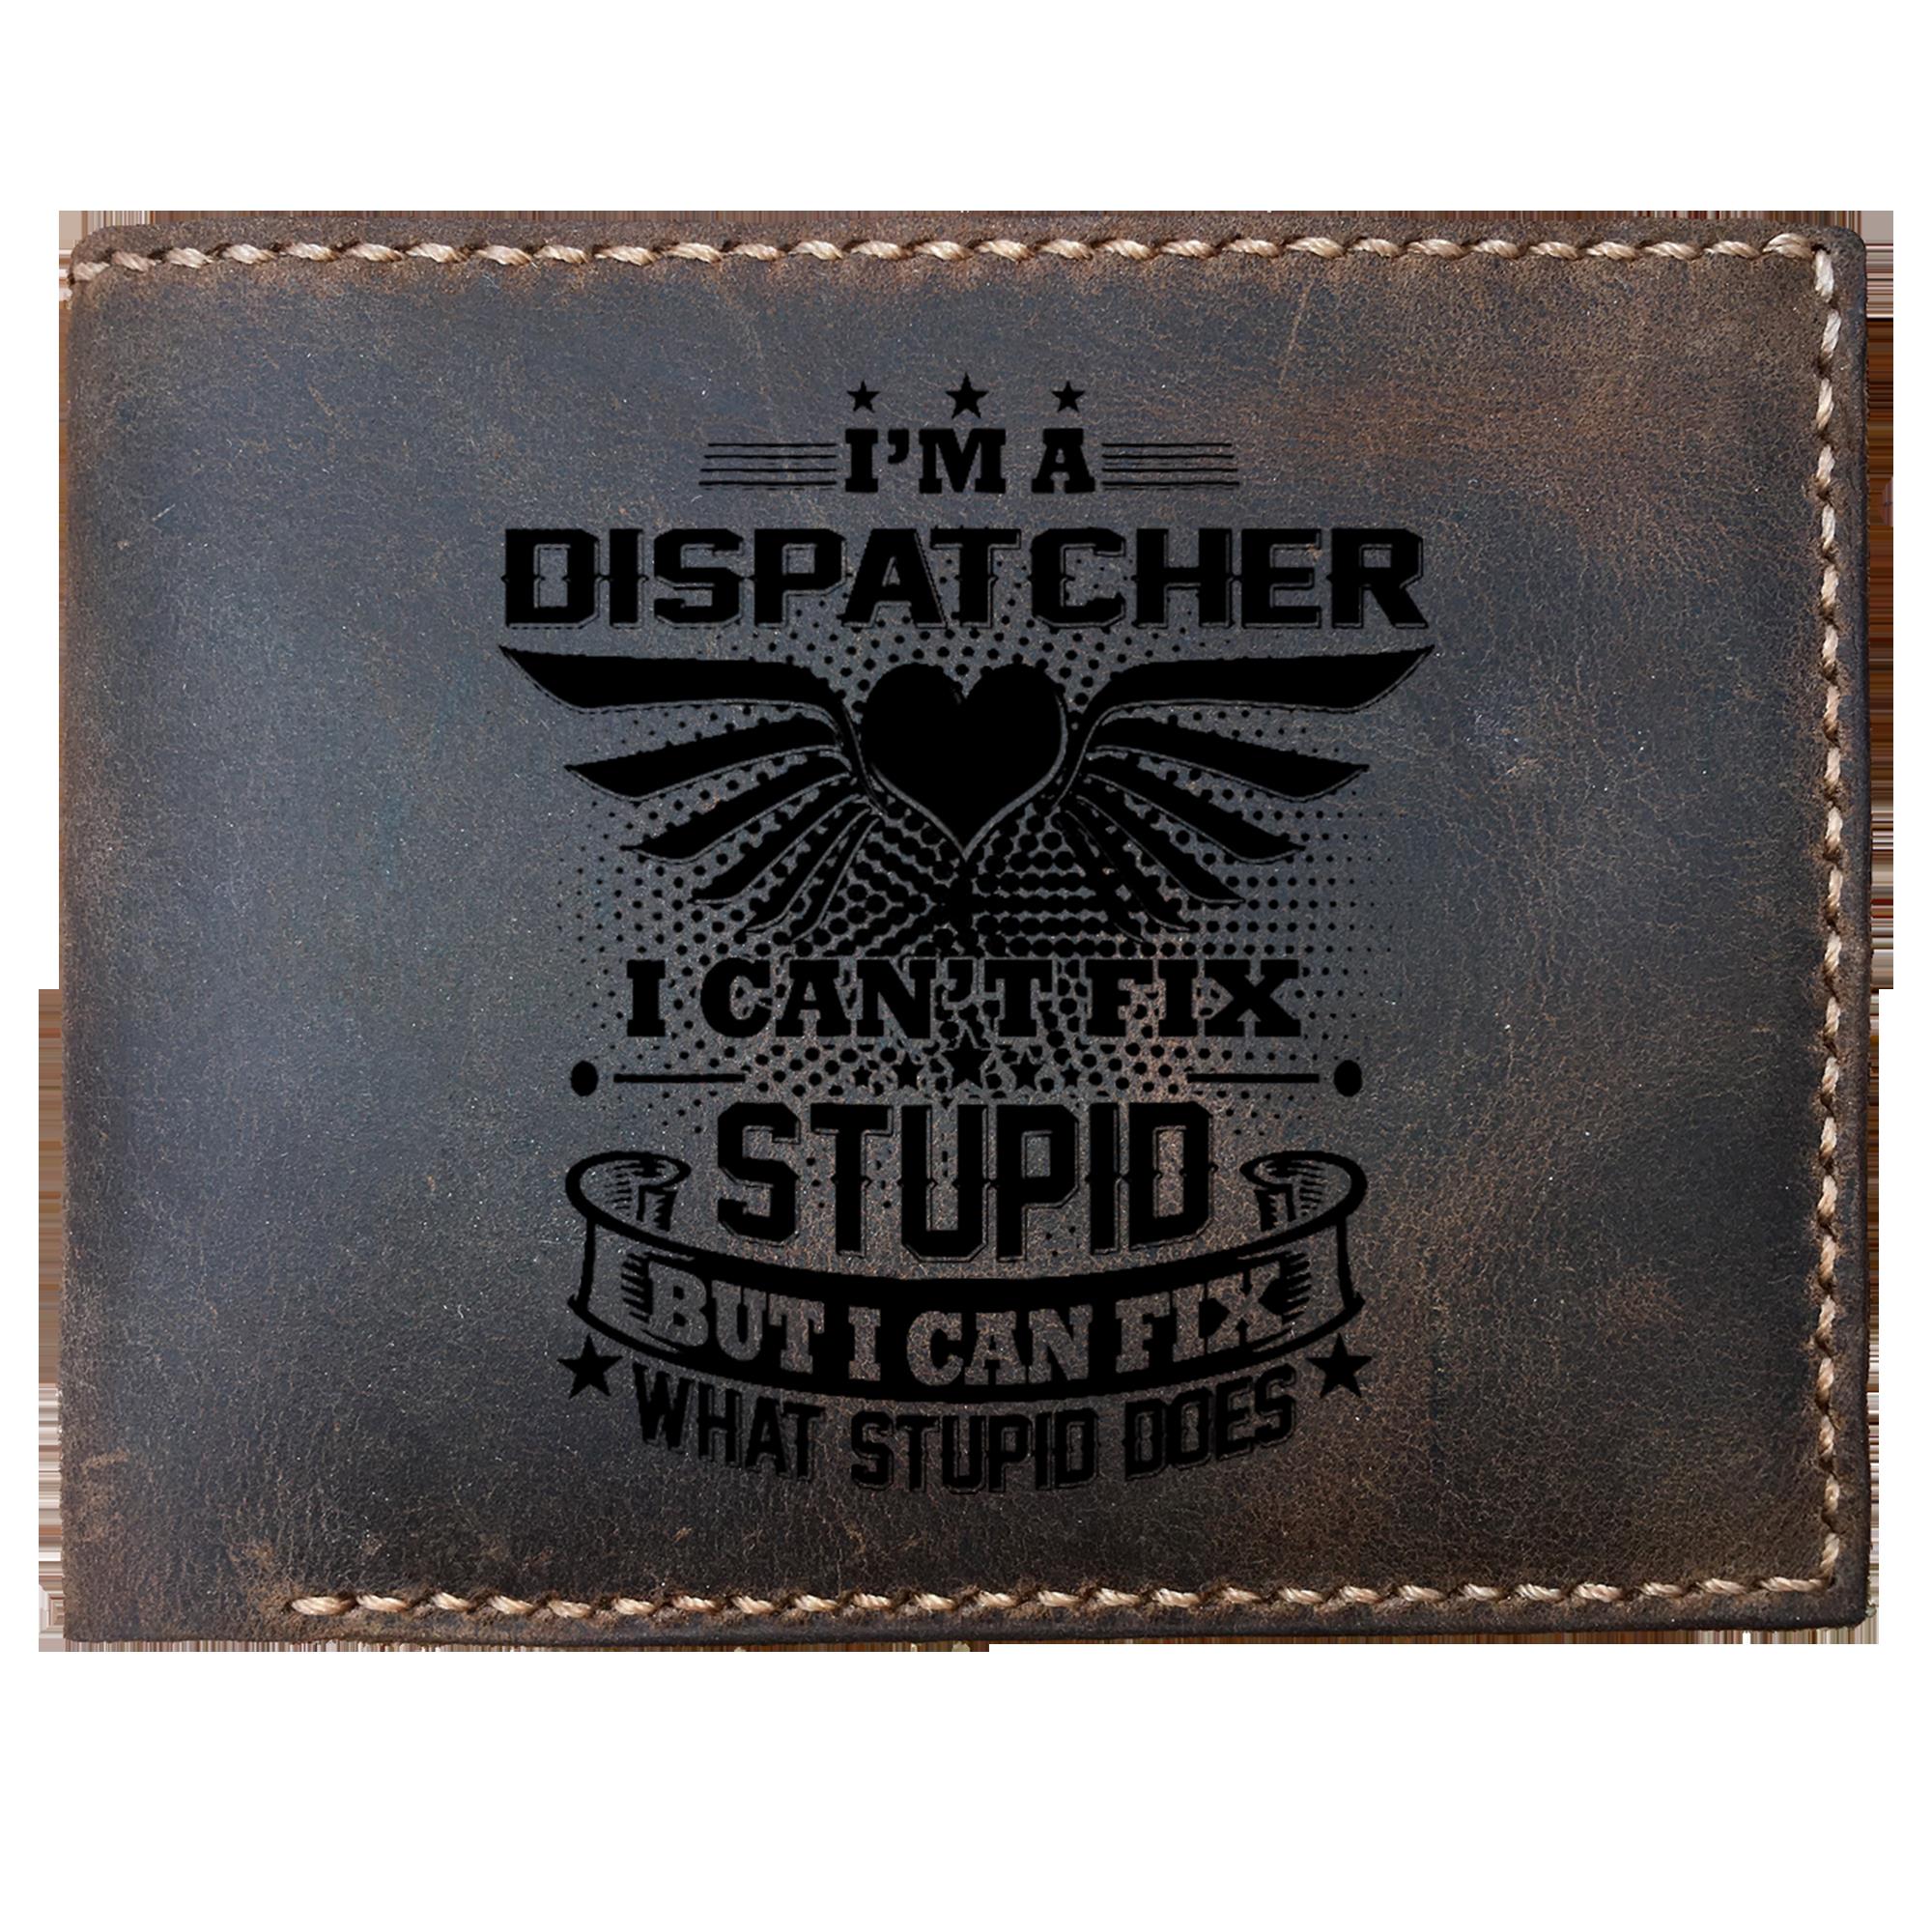 Skitongifts Funny Custom Laser Engraved Bifold Leather Wallet For Men, Funny Police Travel For Your Dad Mom Friend As Seen On